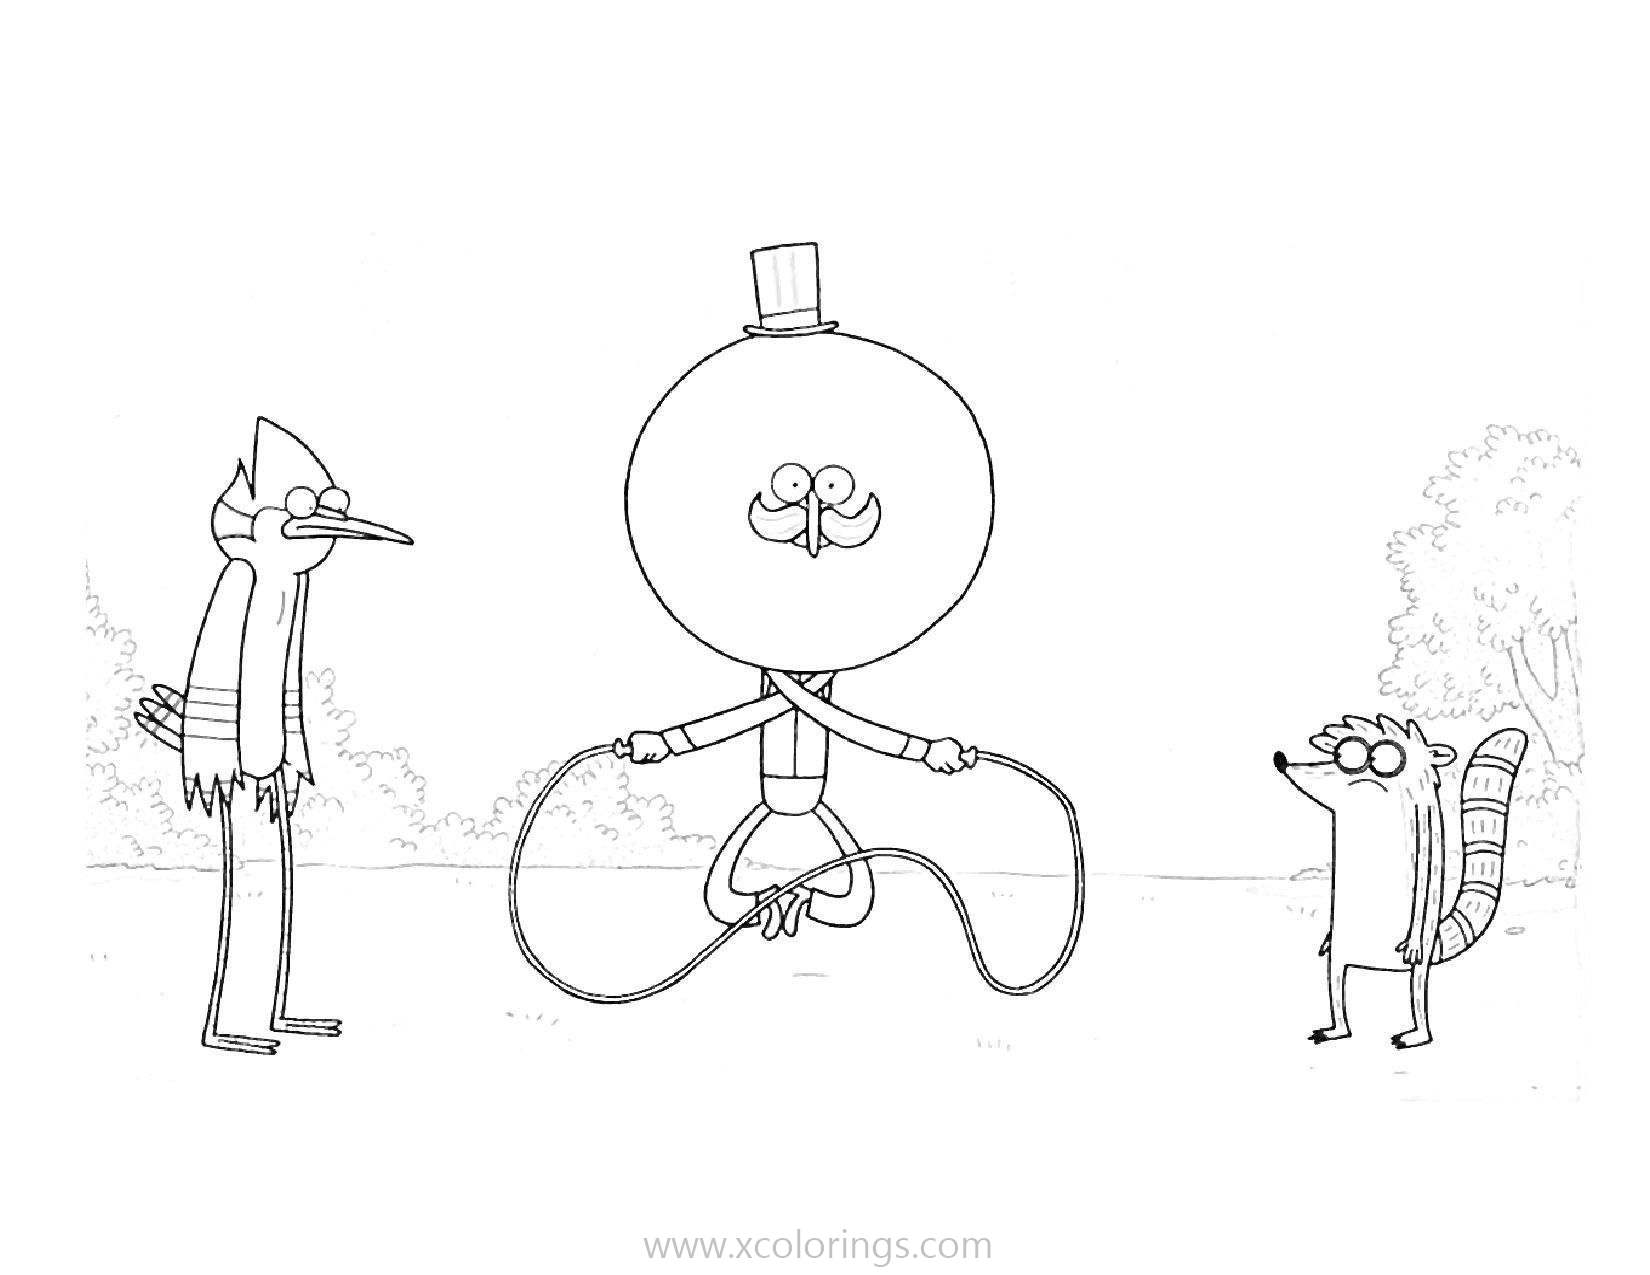 Free Regular Show Coloring Pages Pops Maellard with Rigby and Mordecai printable